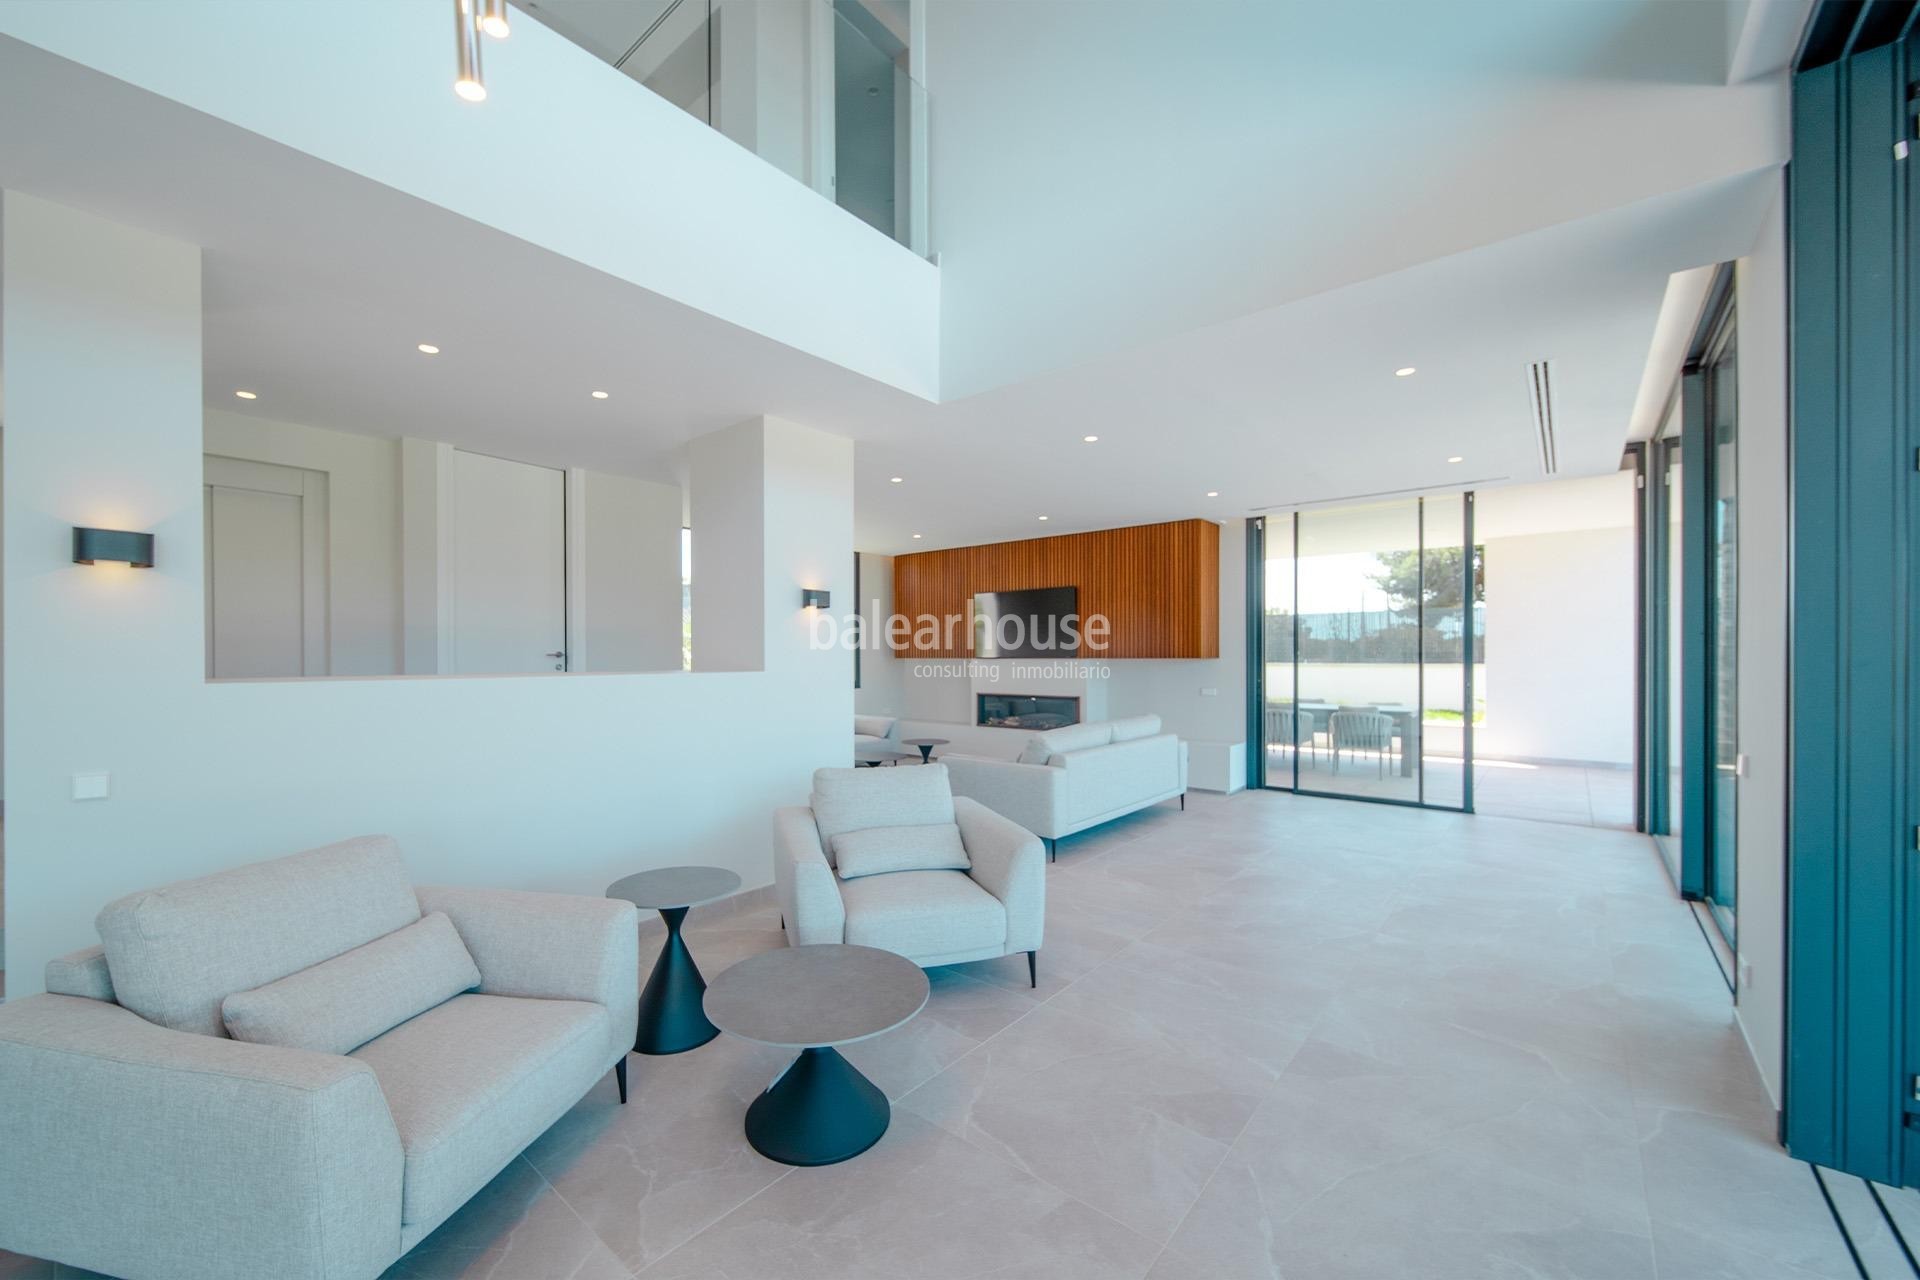 Large modern design villa with high qualities at a short distance from the beach in Cala Vinyes